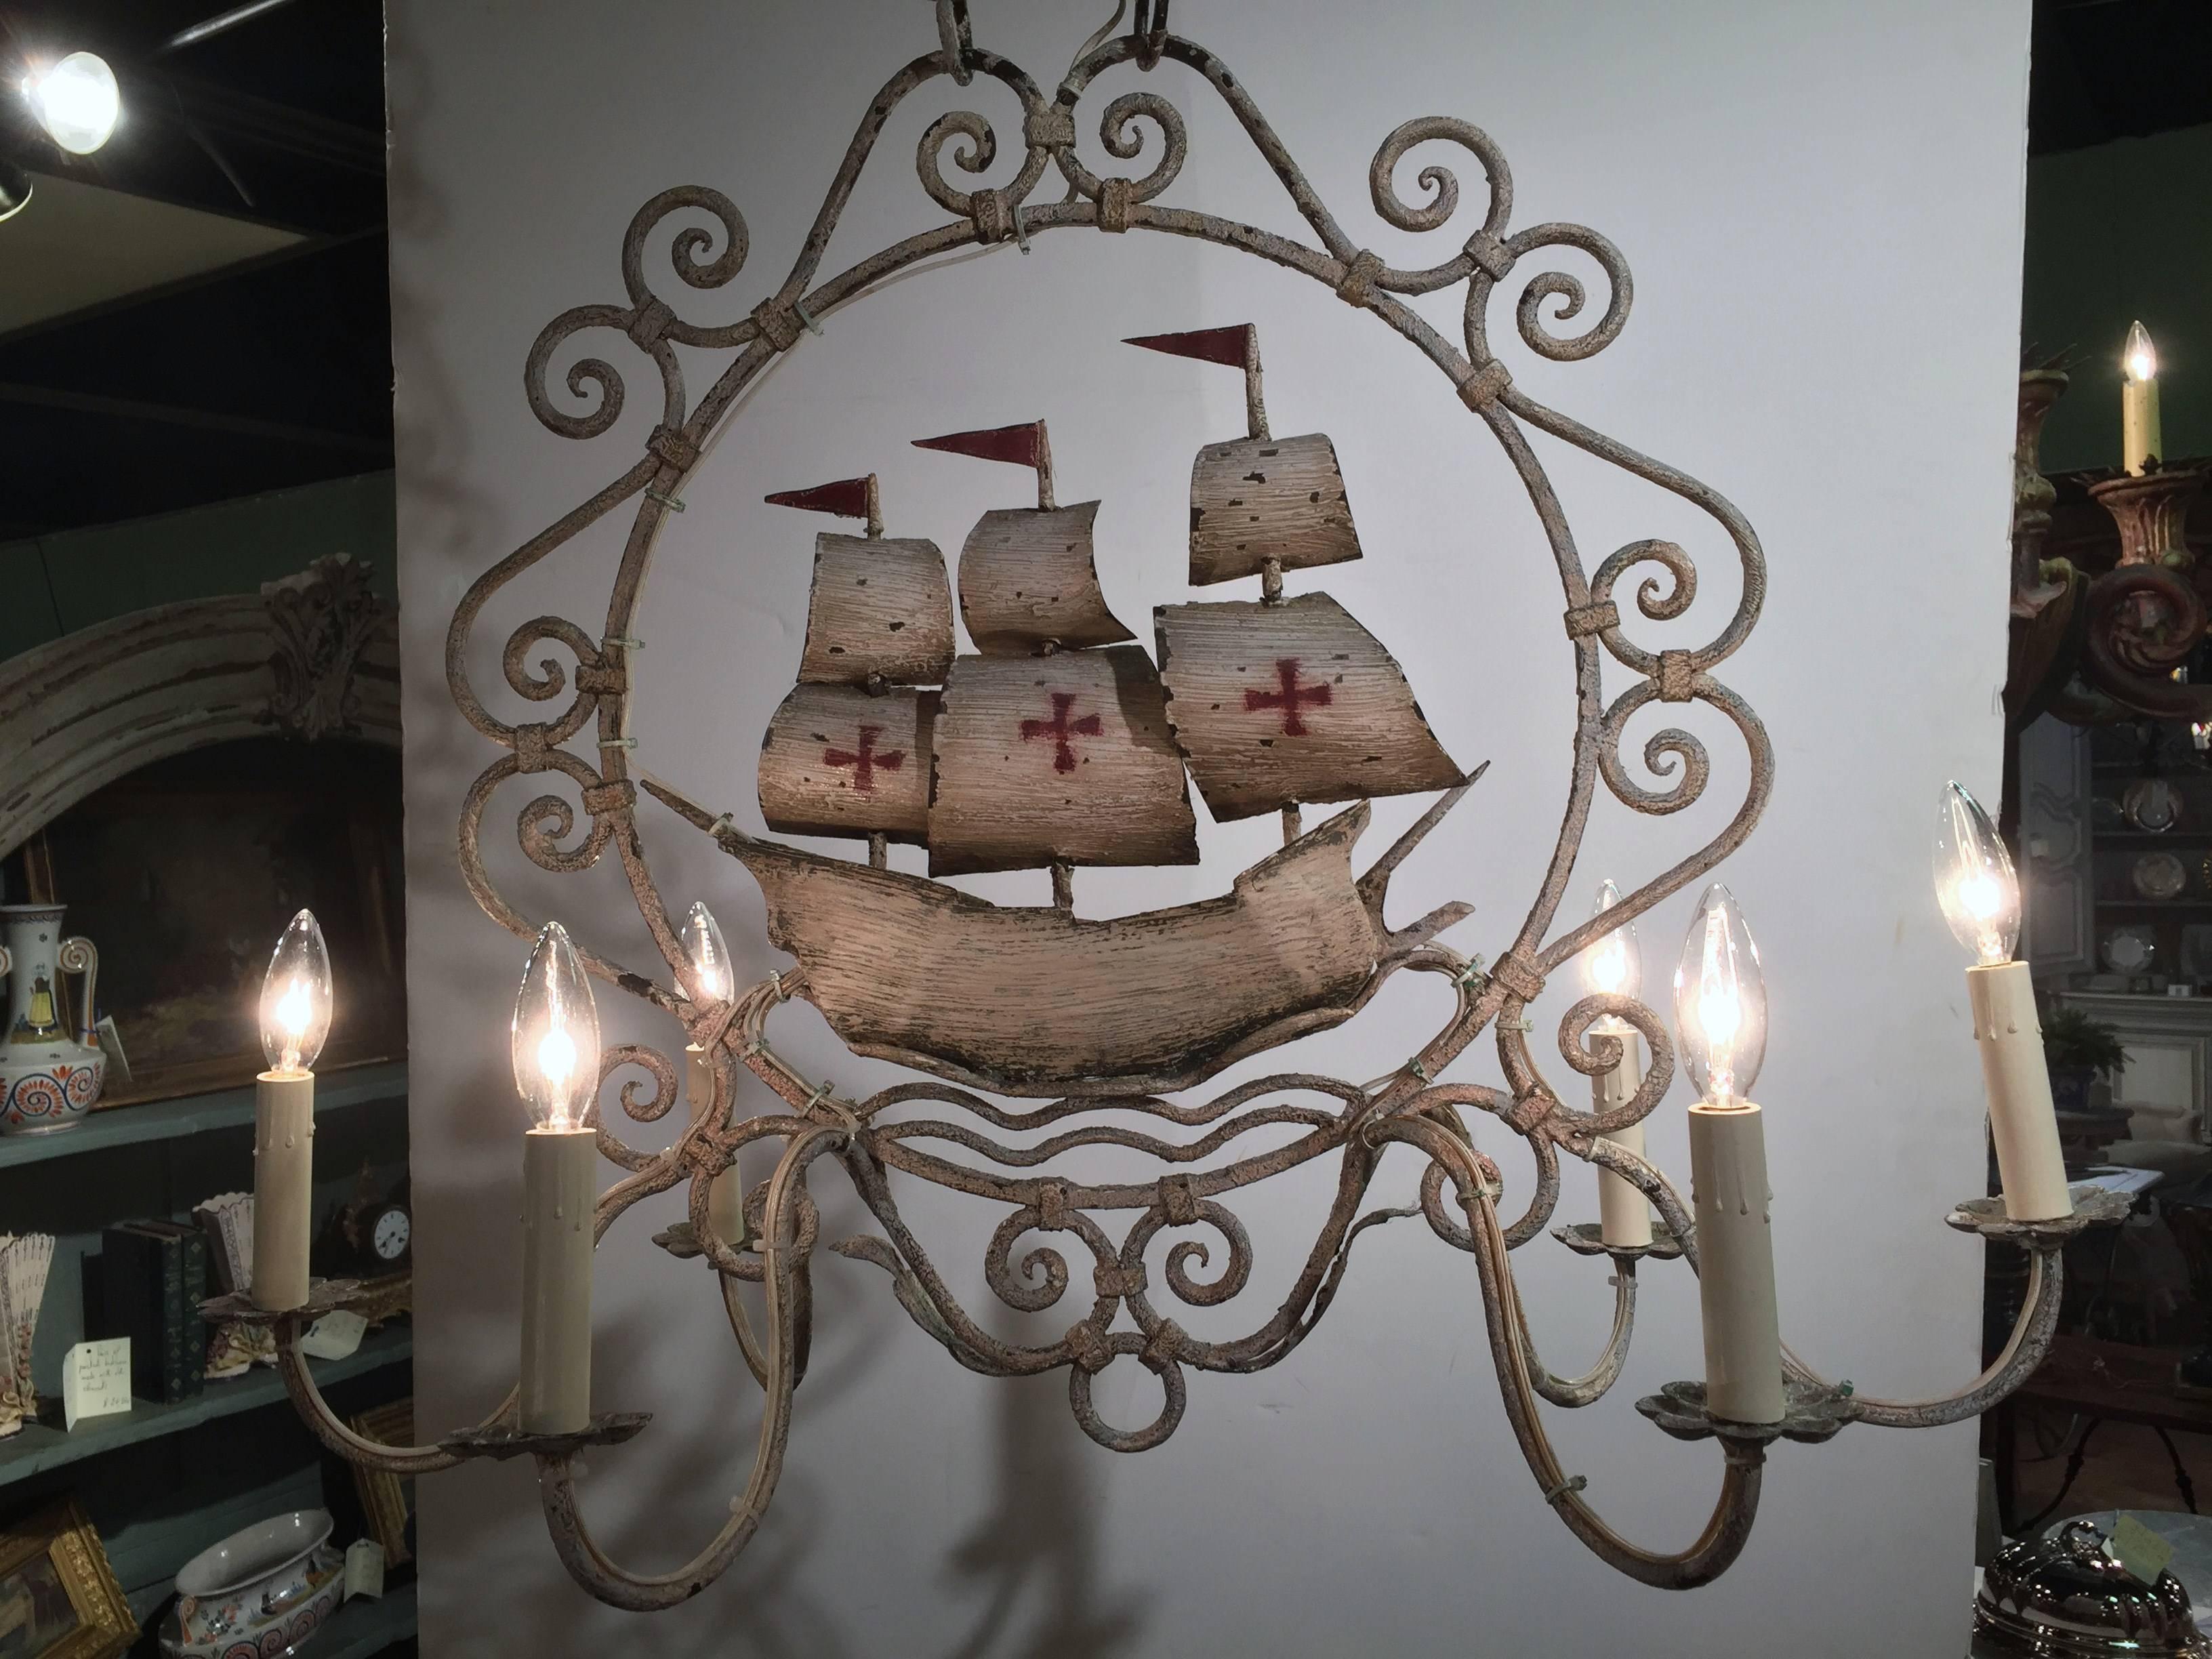 This interesting vintage chandelier was crafted in Normandy, France, circa 1960. Oblong in shape, the fixture has six newly wired lights and is hand painted in a beige, off-white palette. In the middle of the frame is a Classic ship with sails and